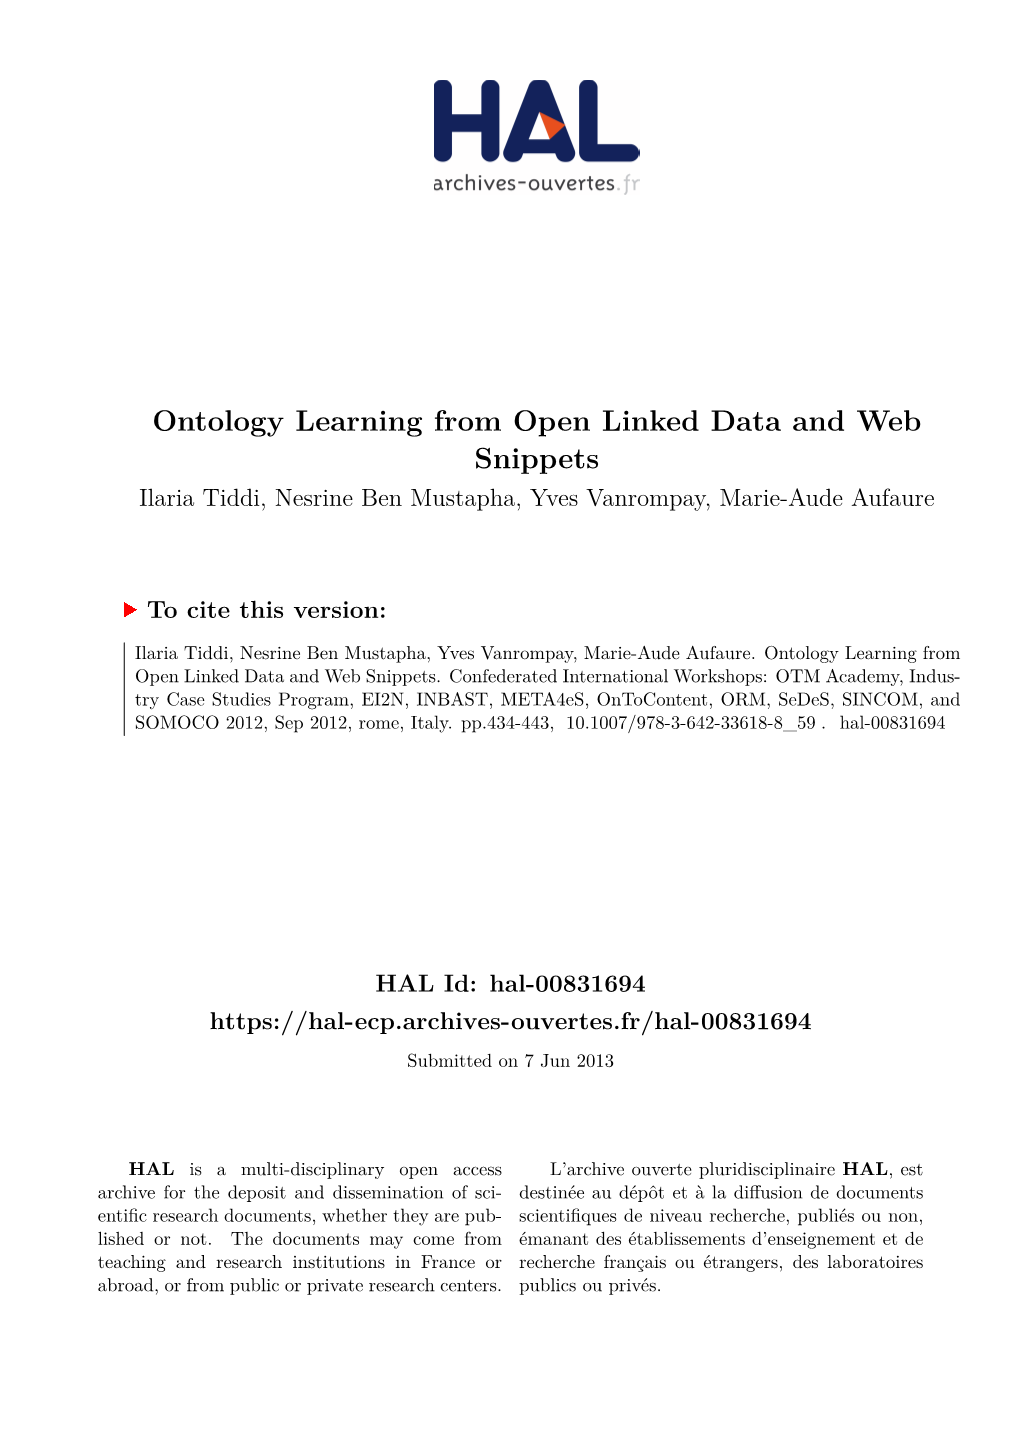 Ontology Learning from Open Linked Data and Web Snippets Ilaria Tiddi, Nesrine Ben Mustapha, Yves Vanrompay, Marie-Aude Aufaure